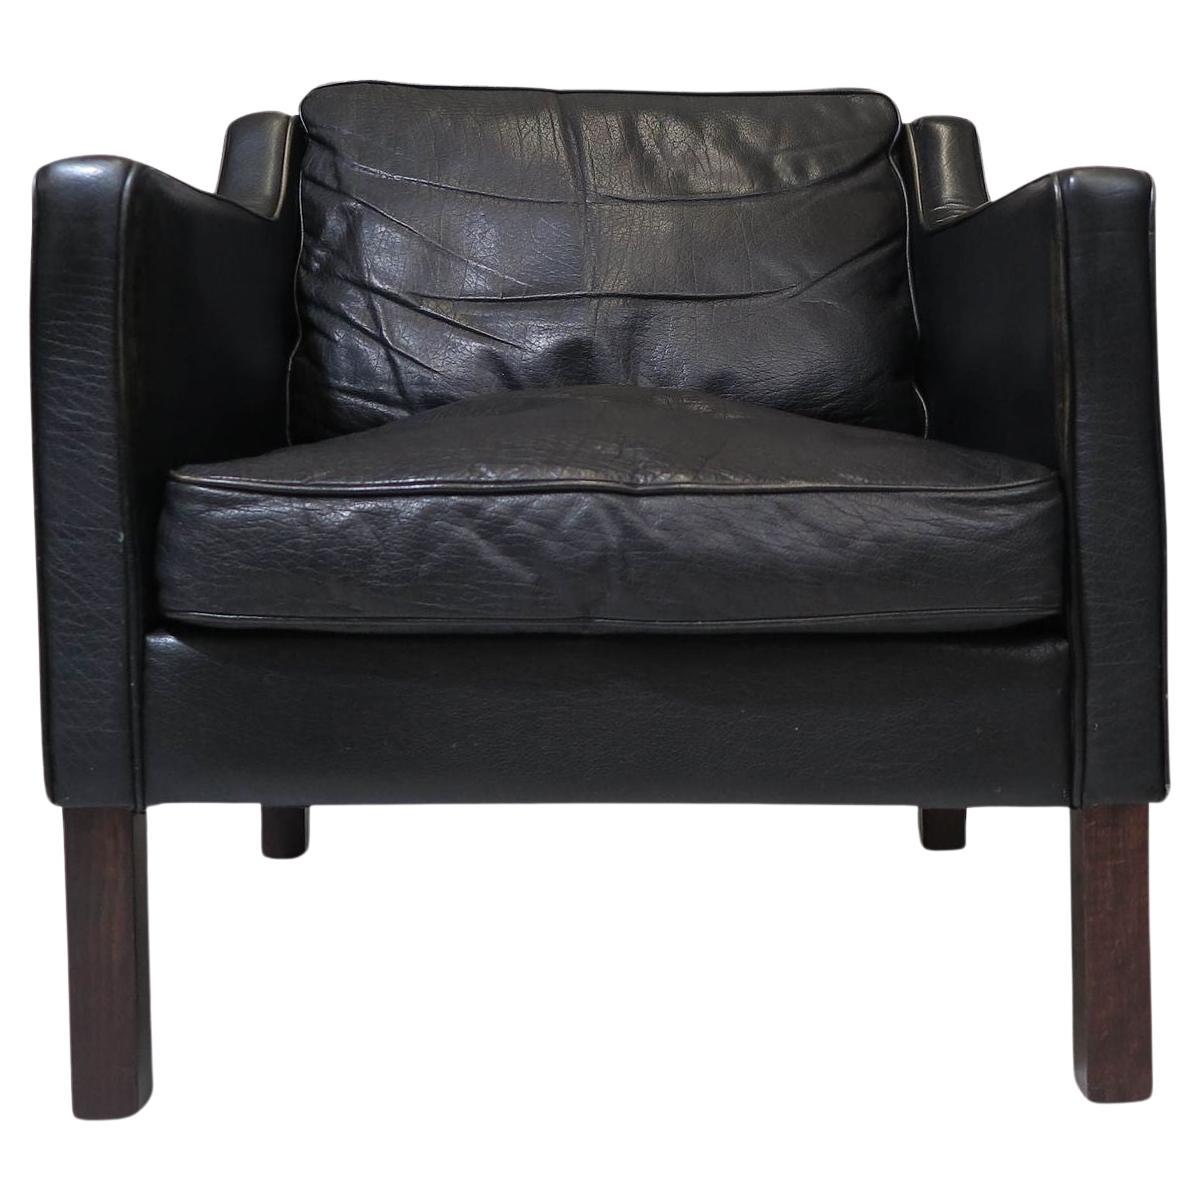 Mid-century Danish Black Leather Lounge Chair in Manner of Borge Mogensen